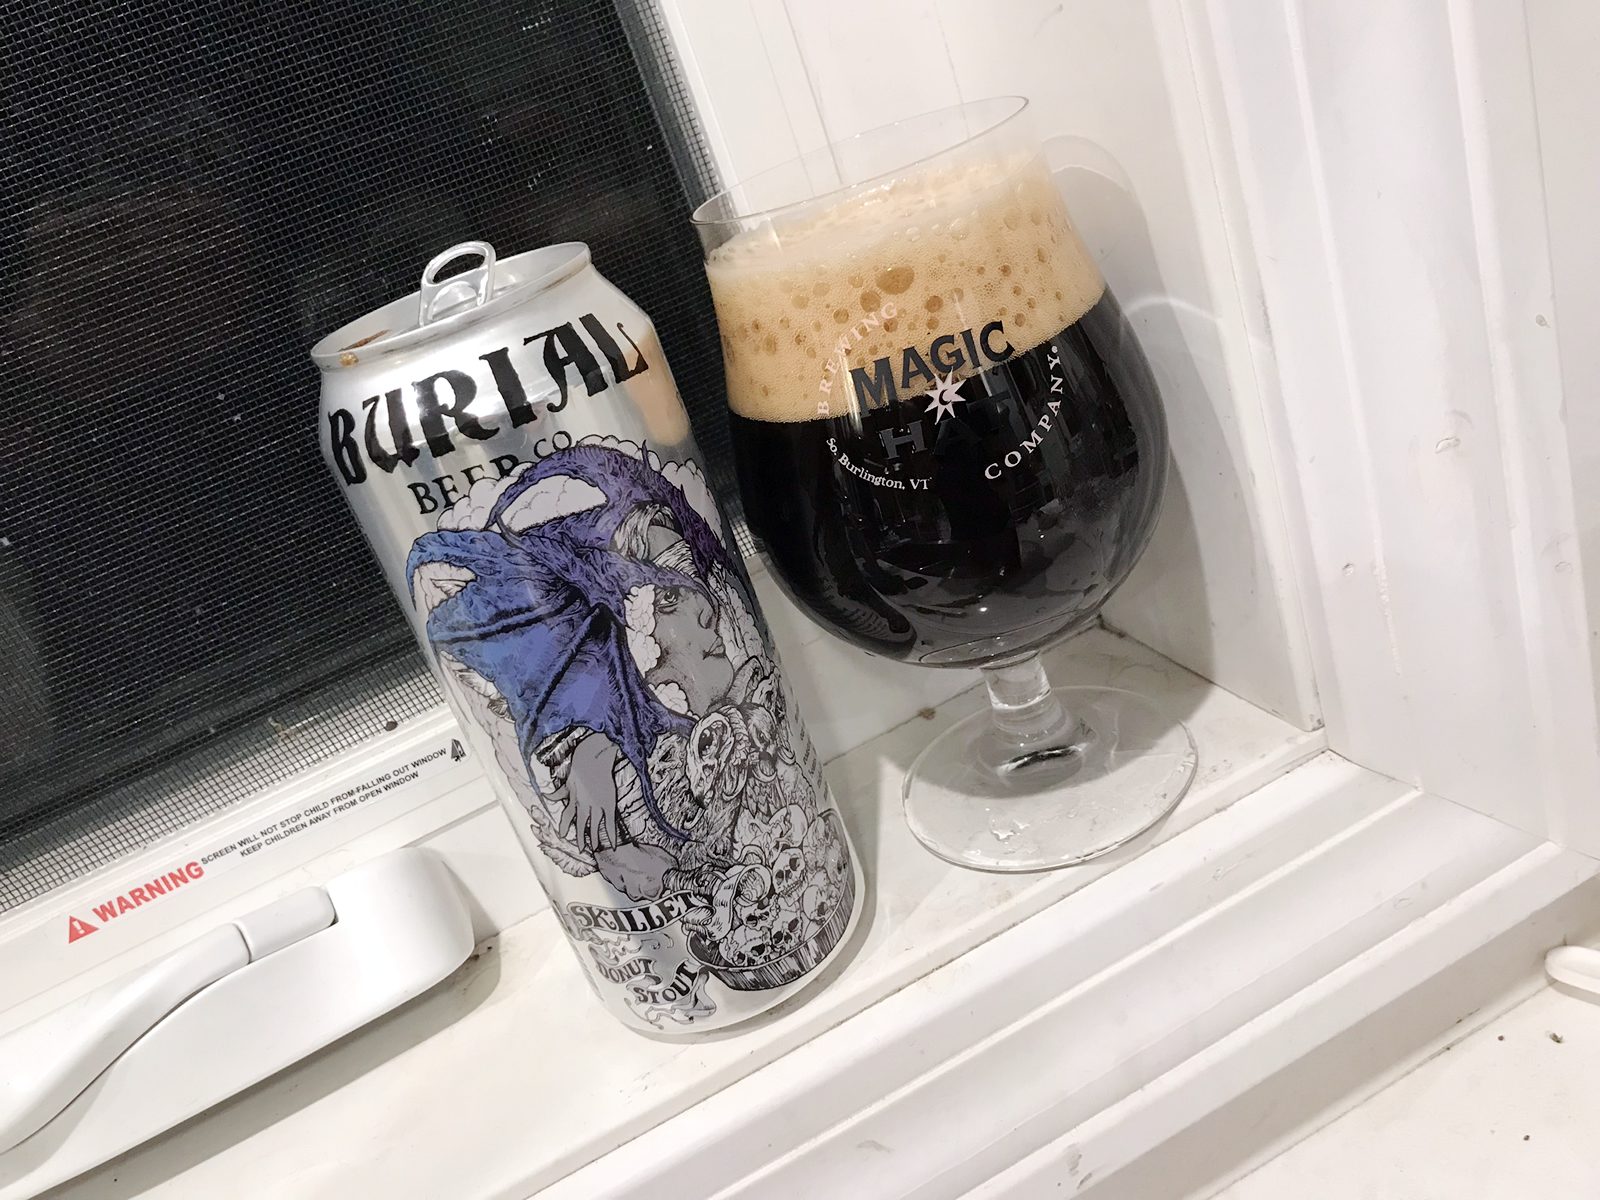 Burial Beer Company: Skillet Donut Stout